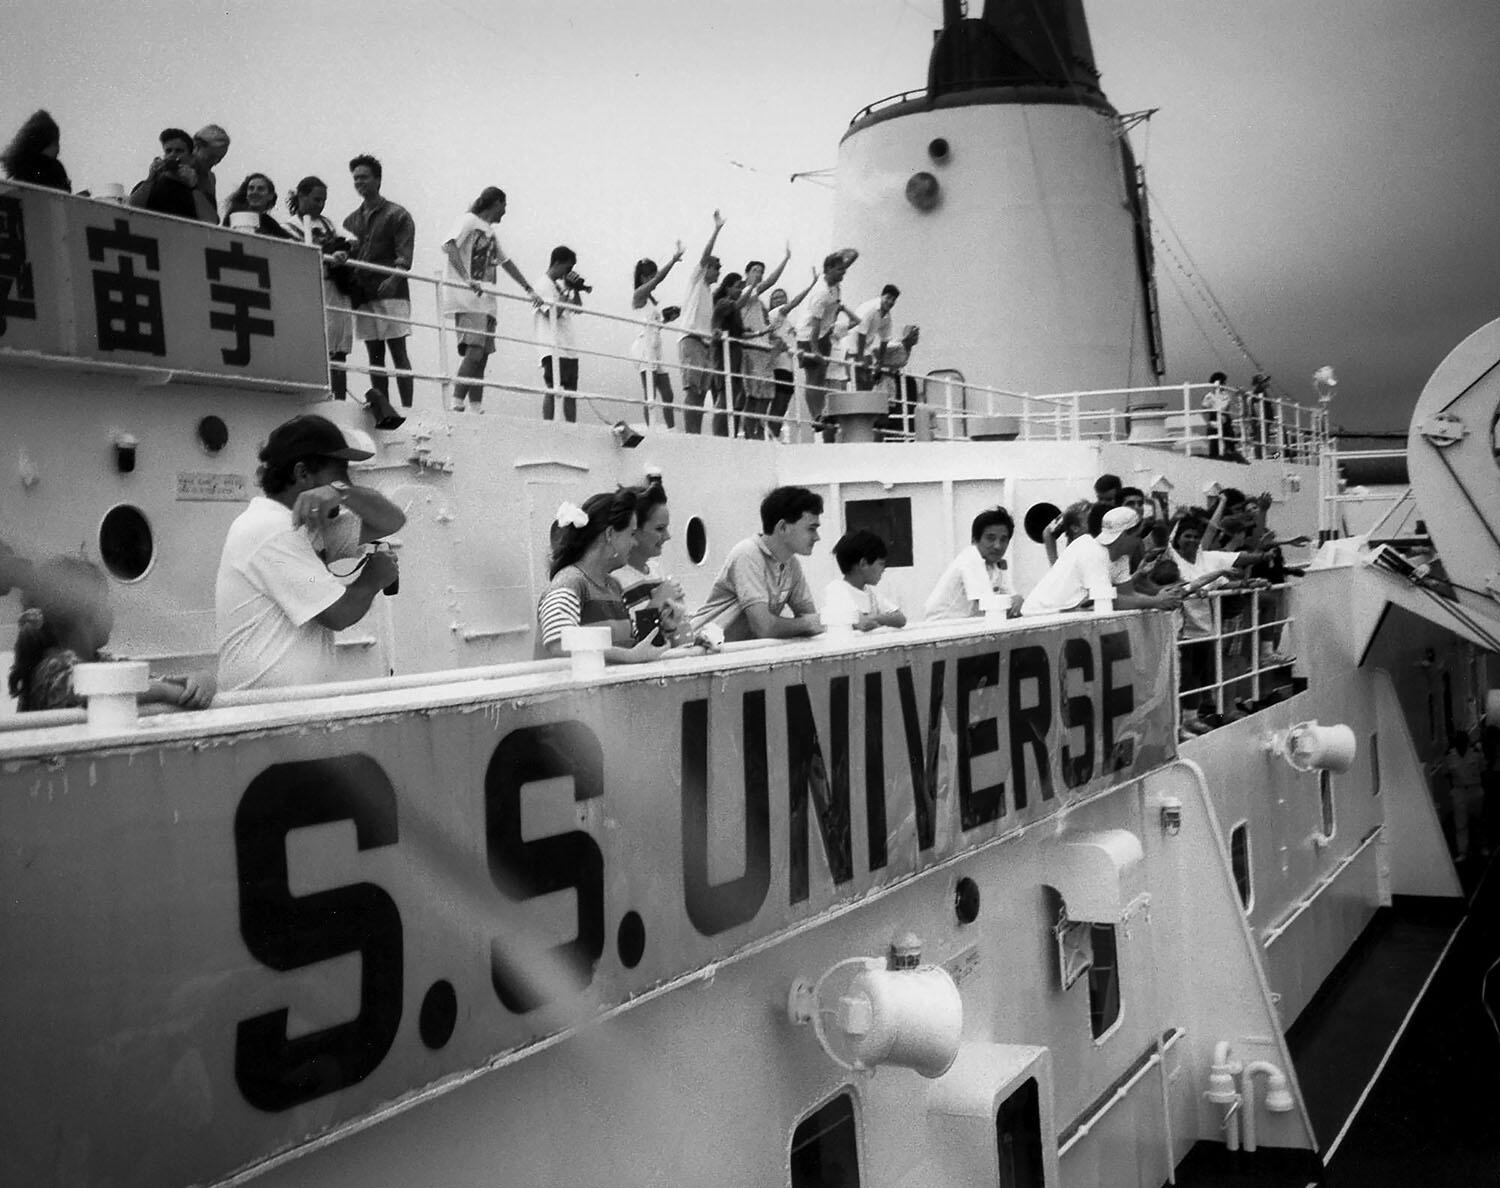 Students aboard the SS Universe as part of the Semester at Sea program. (Photo courtesy of the Semester at Sea Program.)